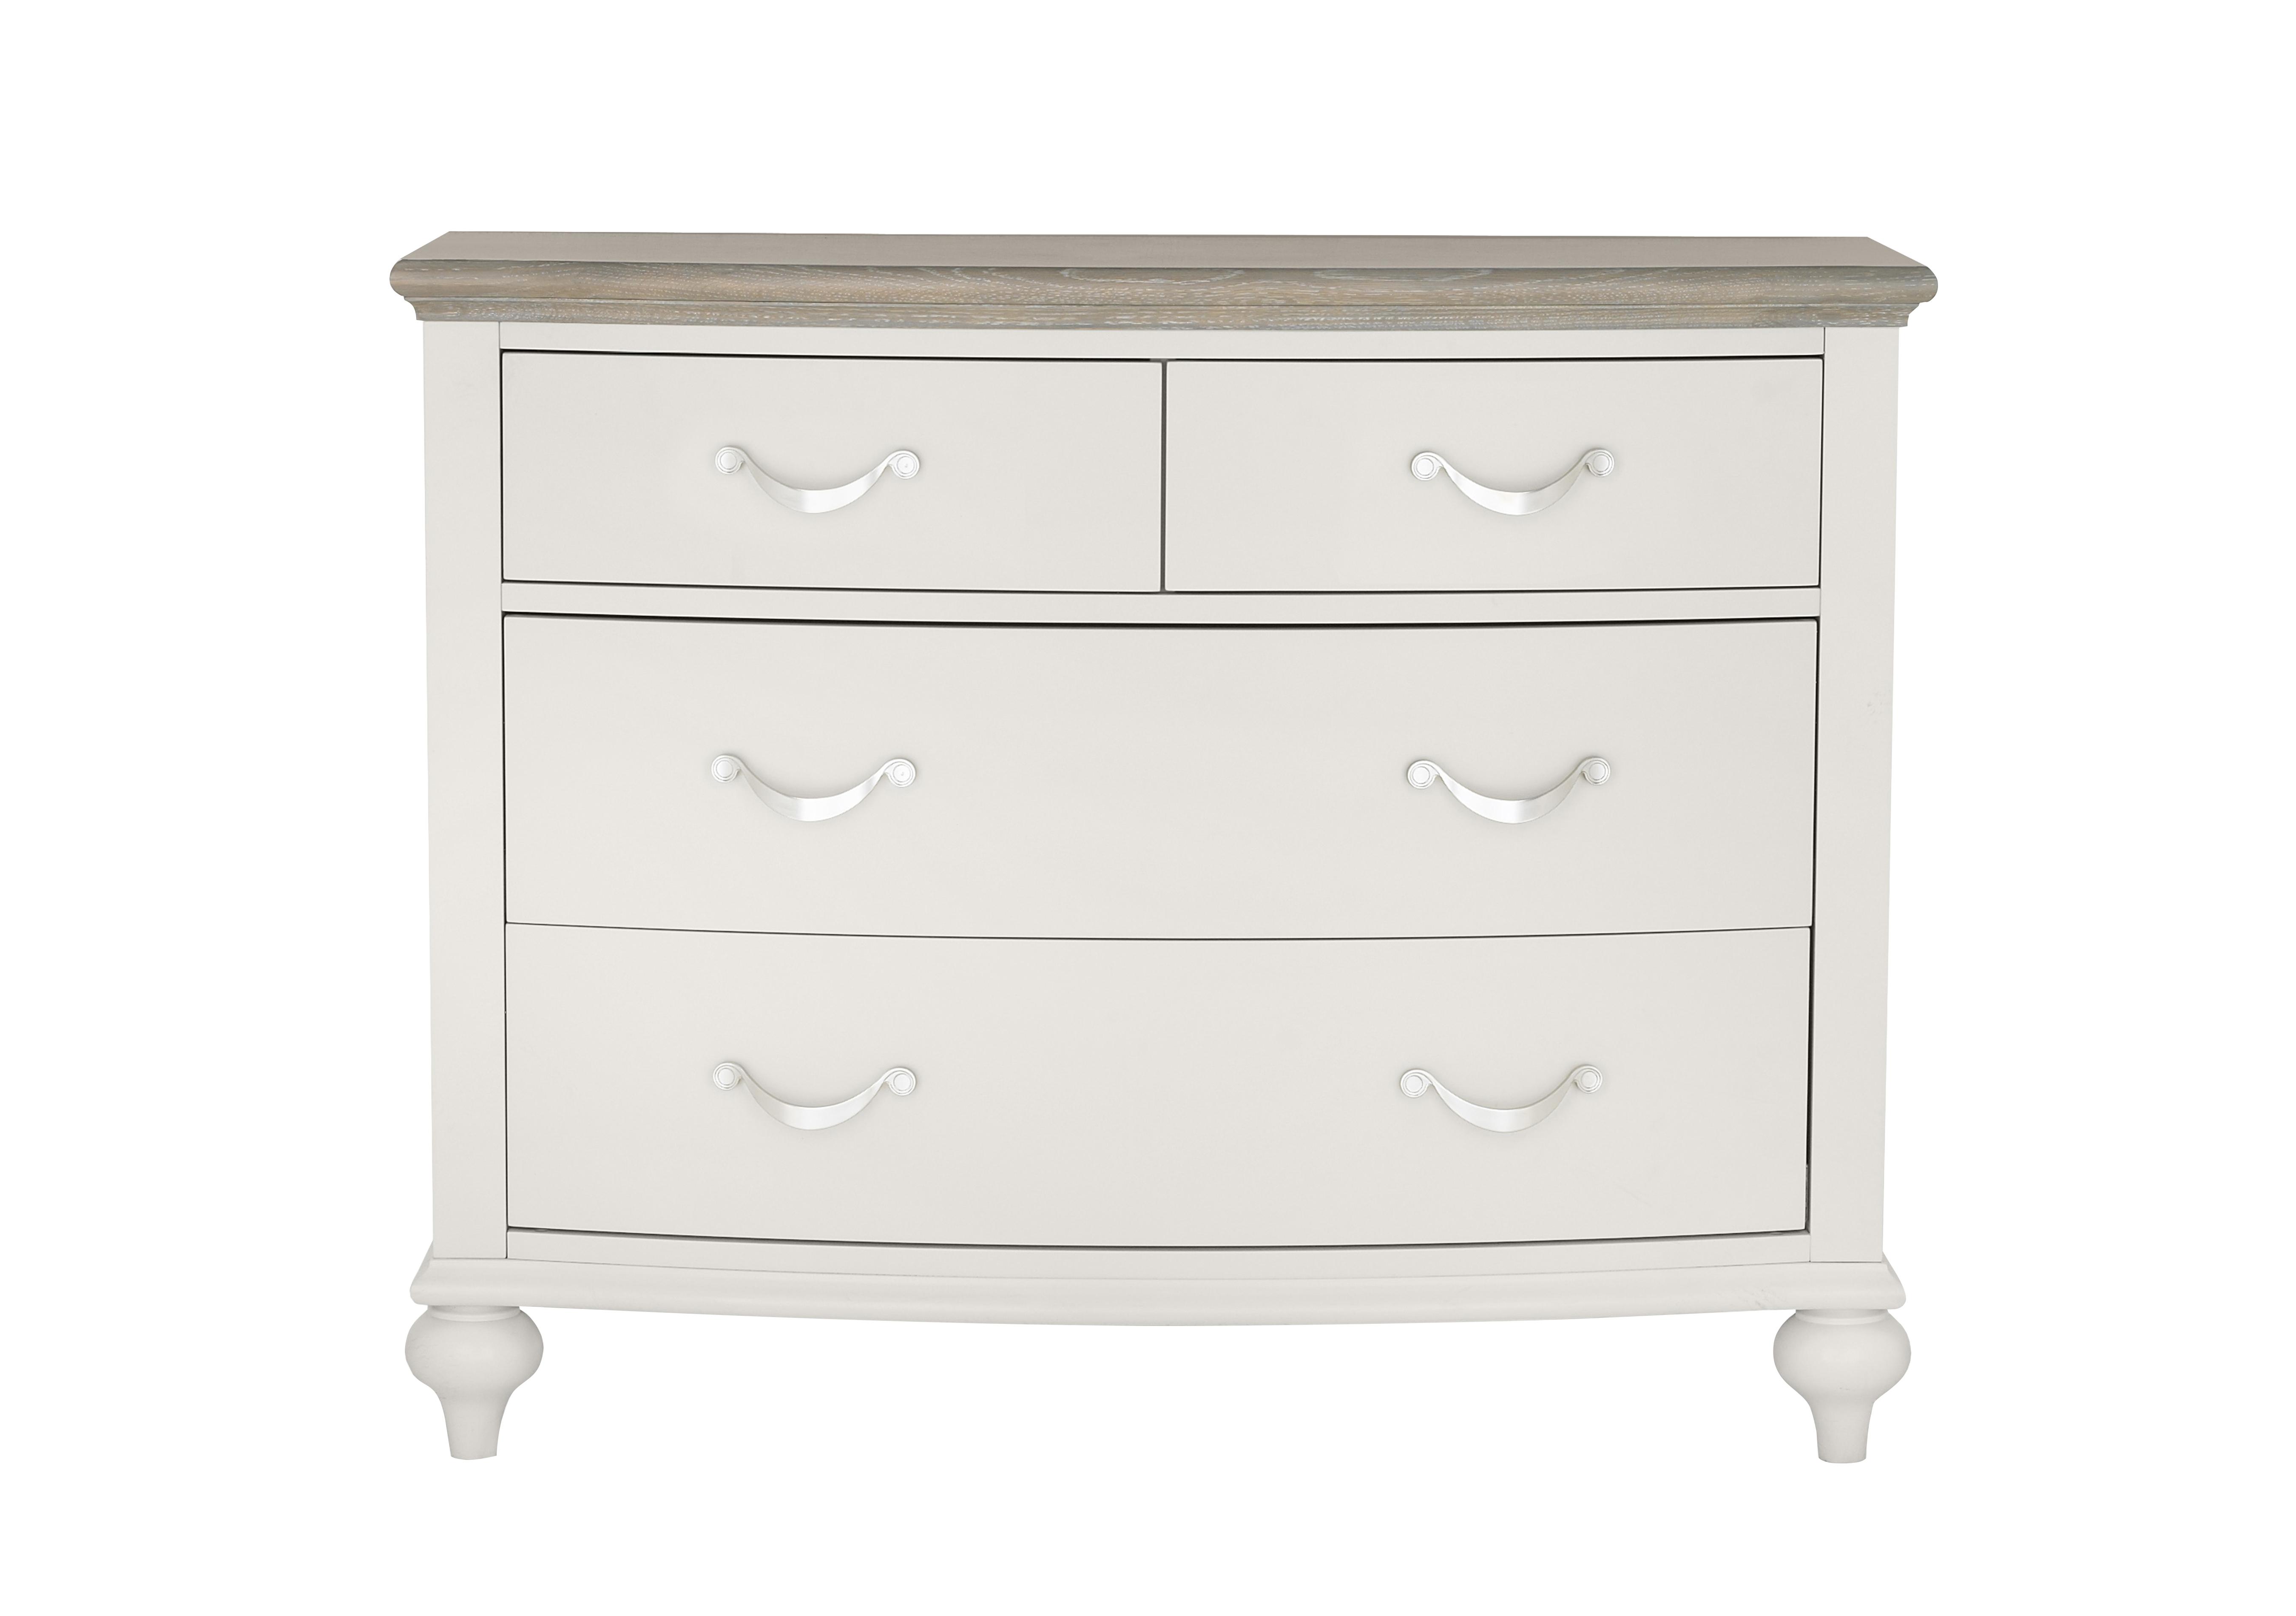 Annecy 2+2 Drawer Chest in Soft Grey And Grey Washed Oak on Furniture Village